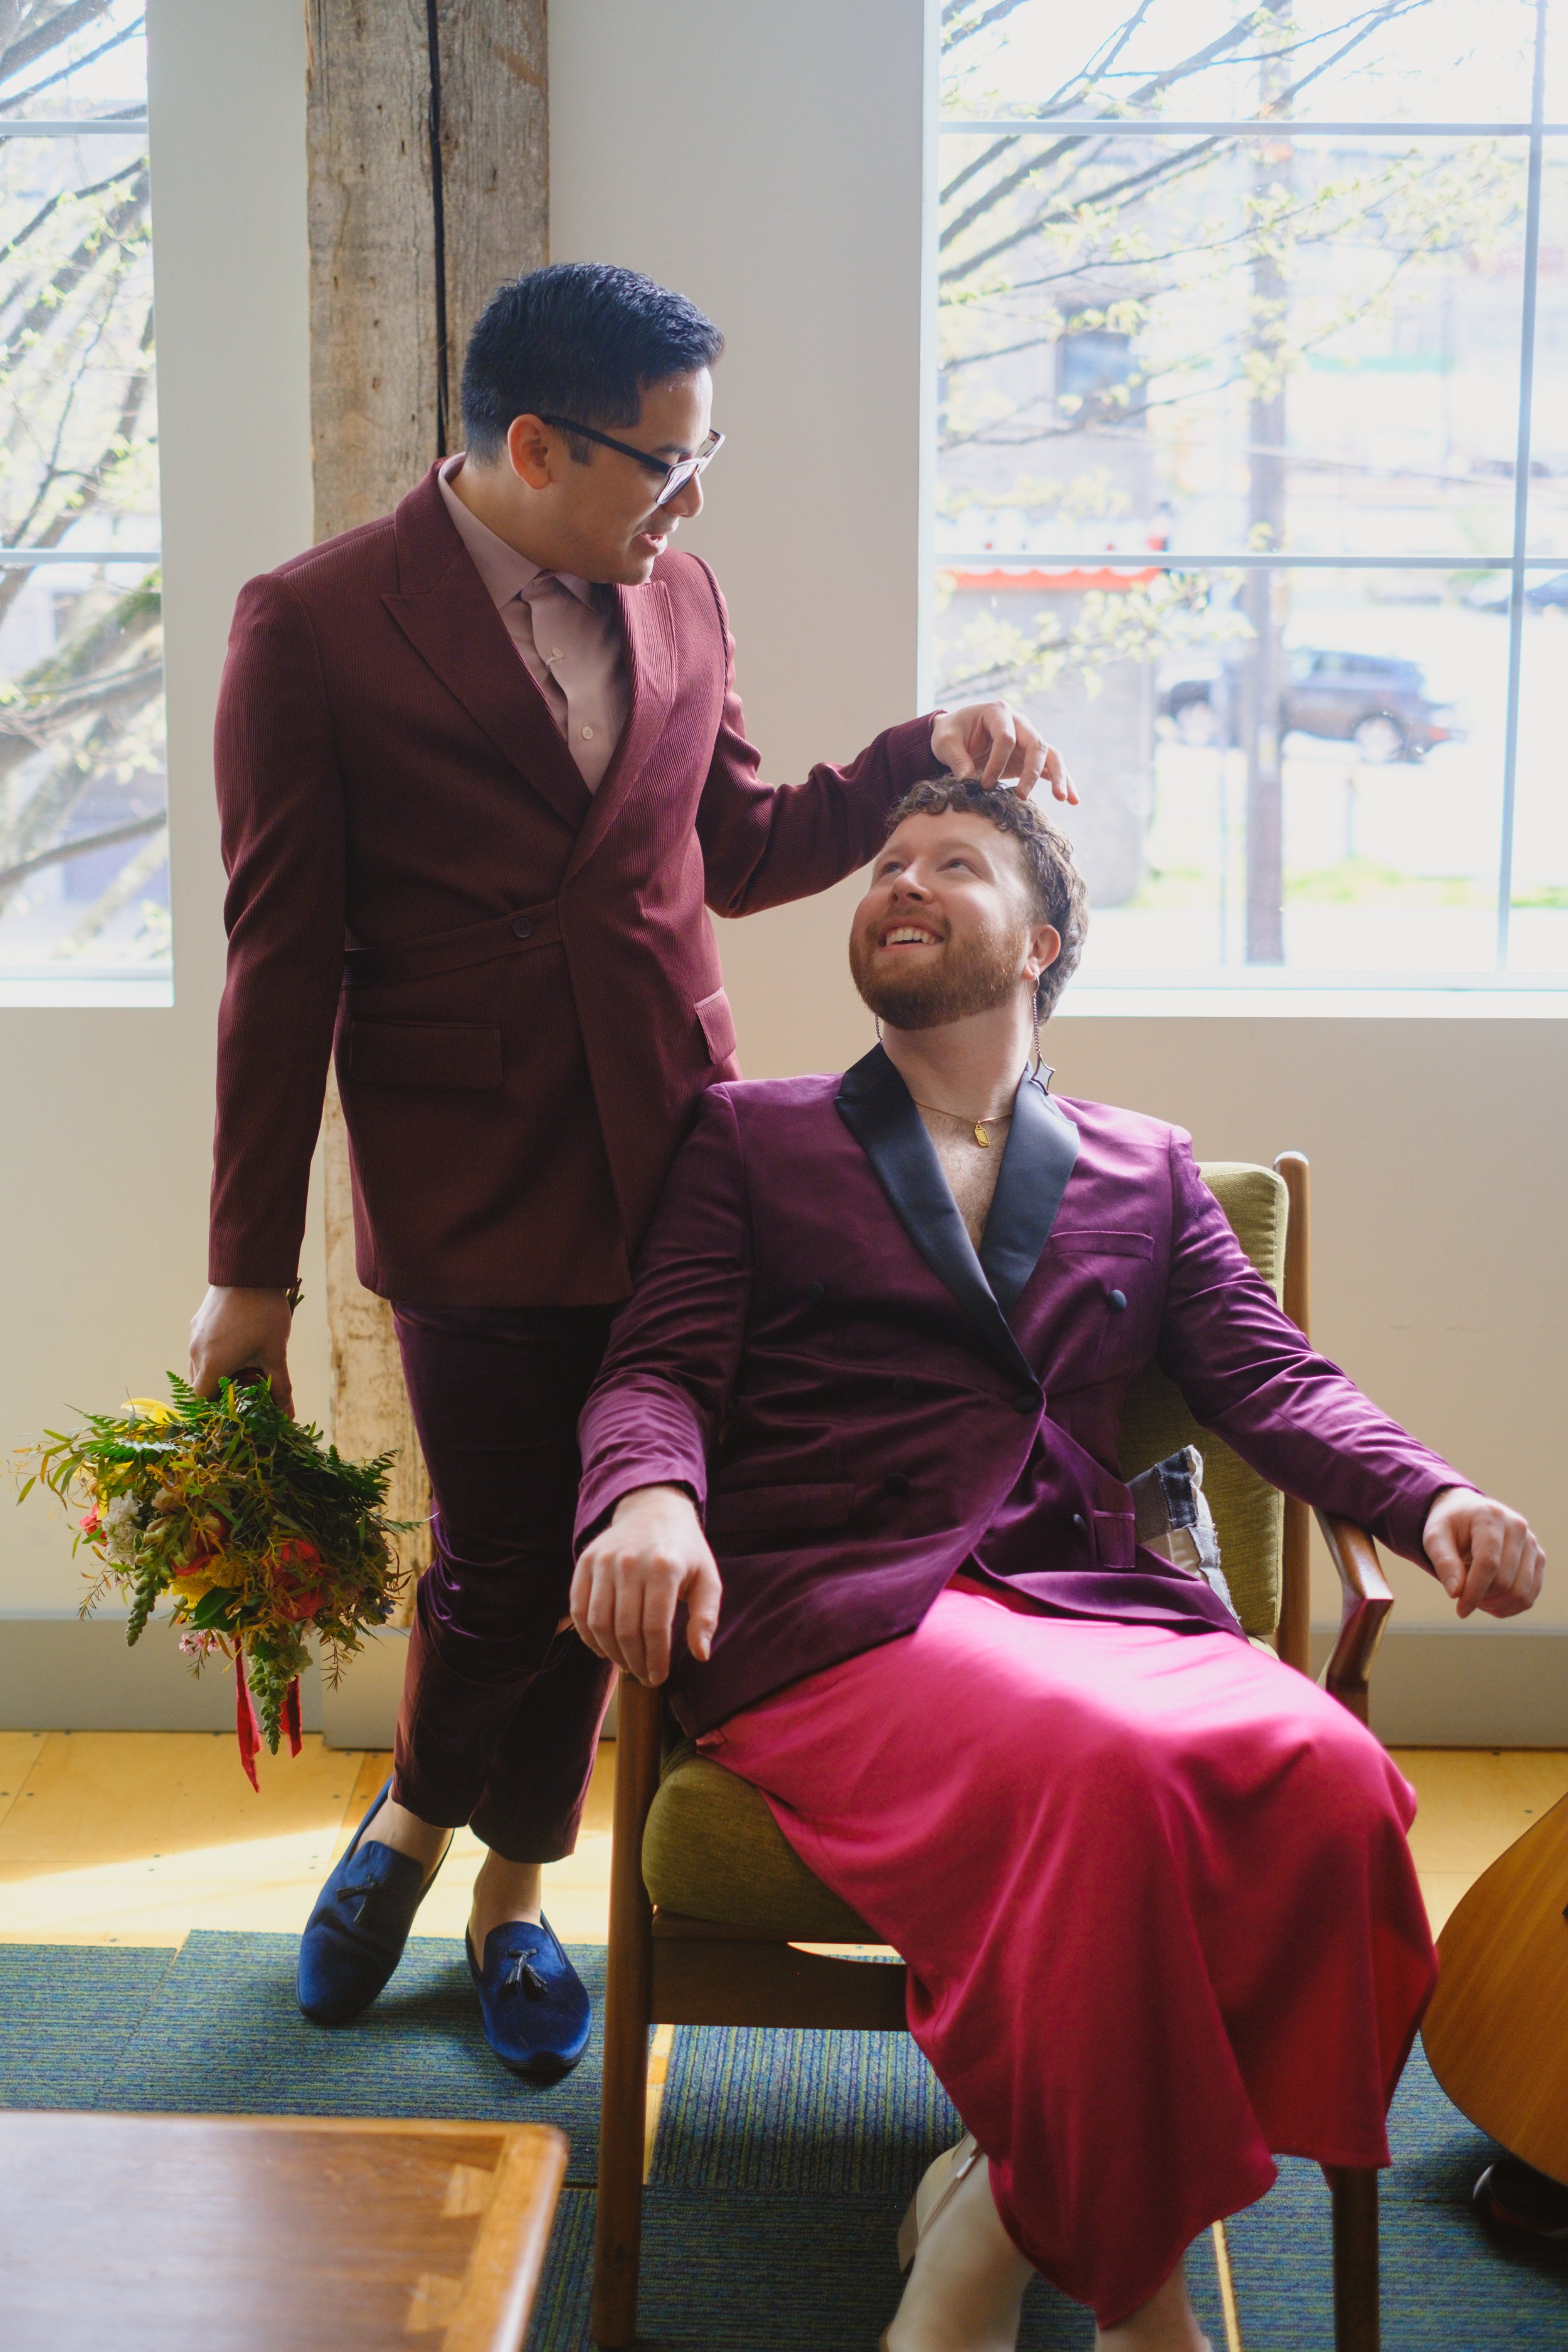  A groom stands next to his future husband who is seated. He is playing with his hair with one hand and holding a colorful bouquet with the other. 